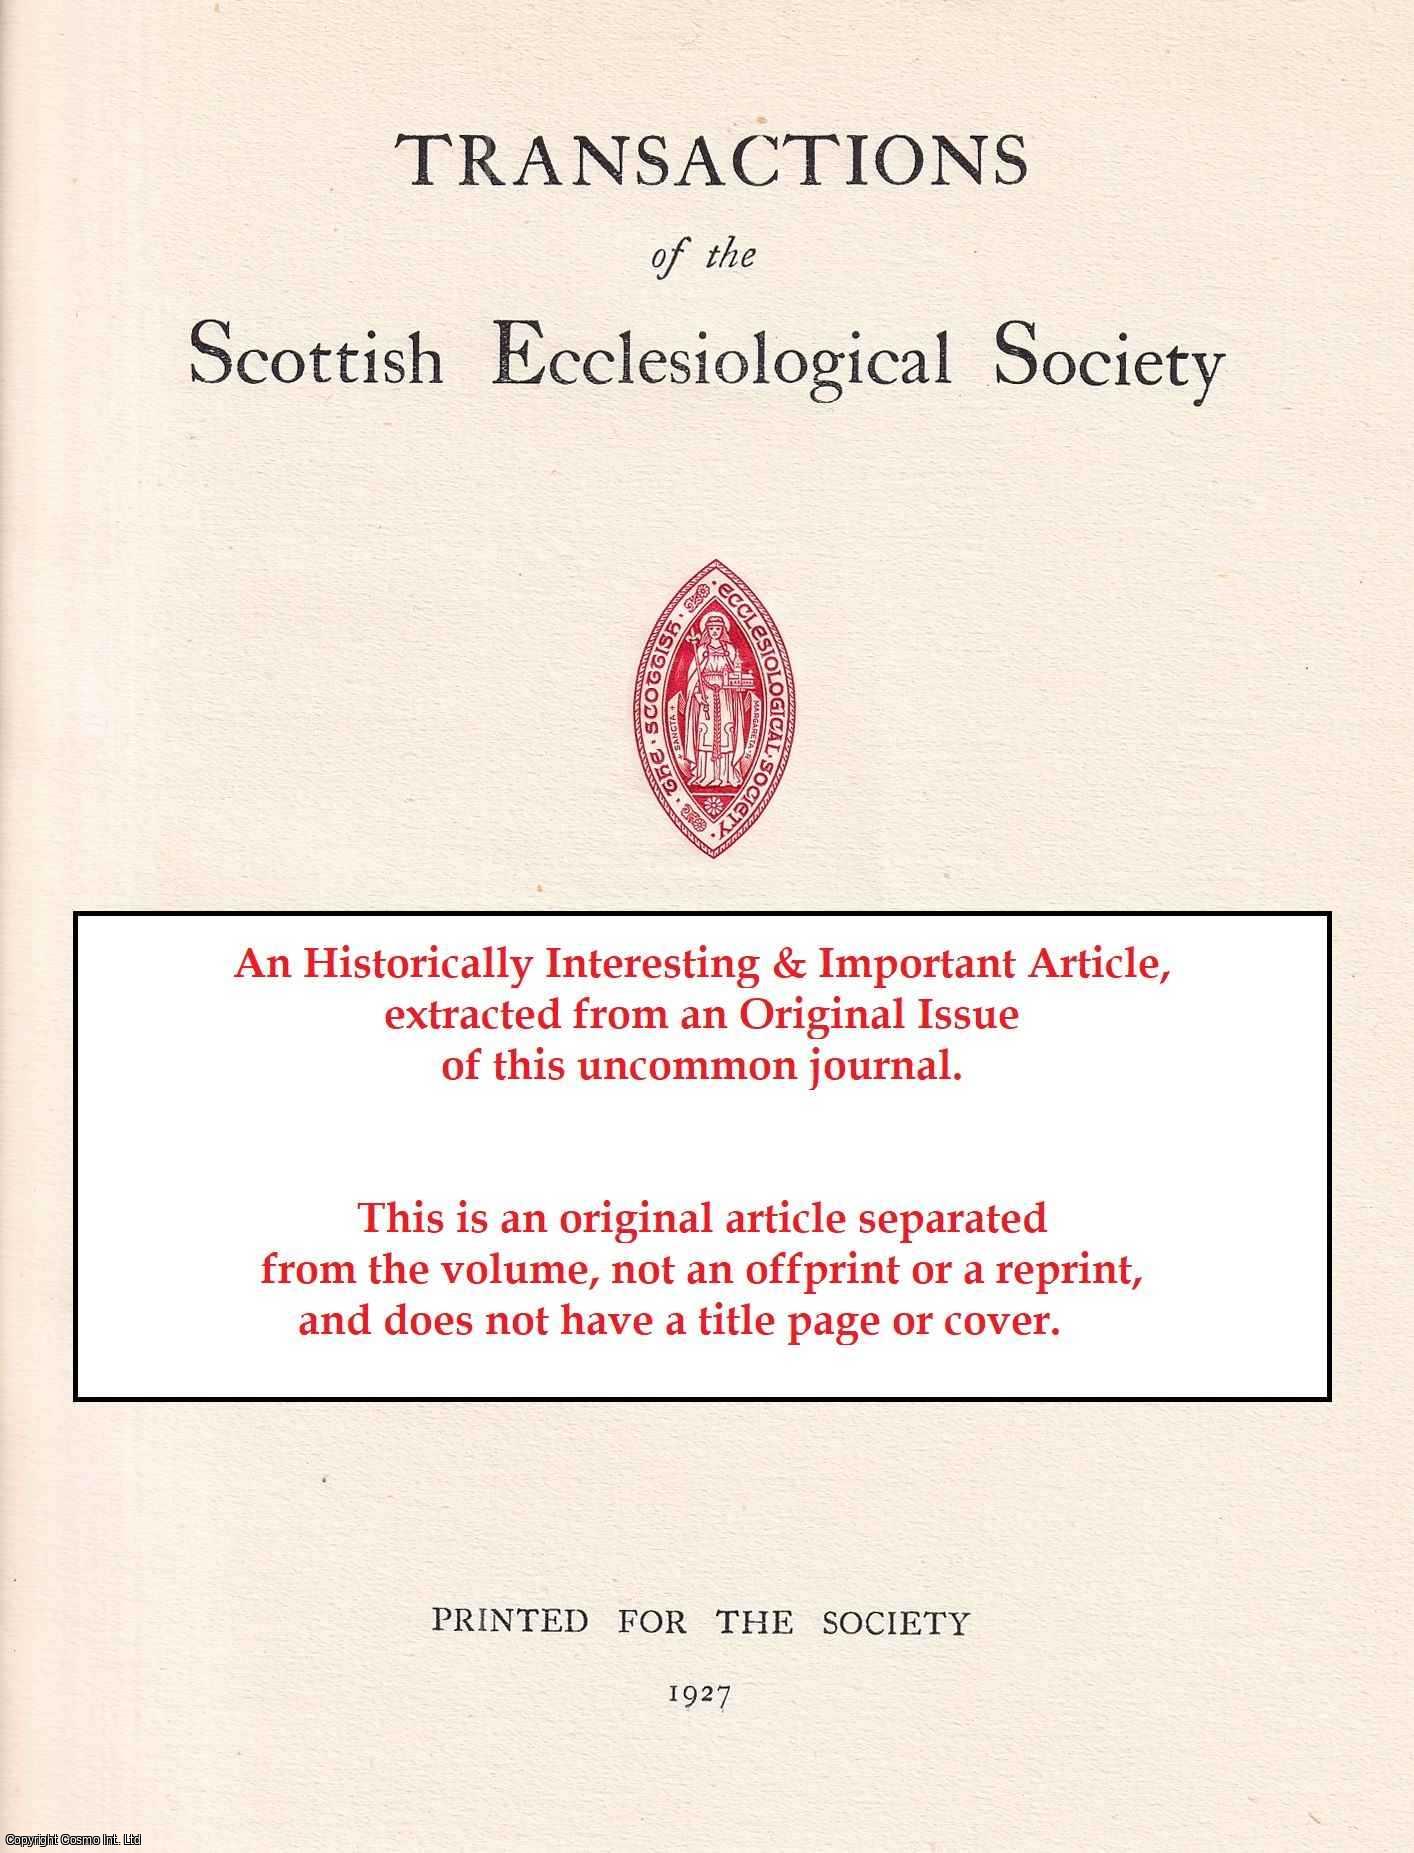 G. Milne-Home - The Gallican Liturgy. An original article from the Transactions of the Aberdeen Ecclesiological Society, 1901.